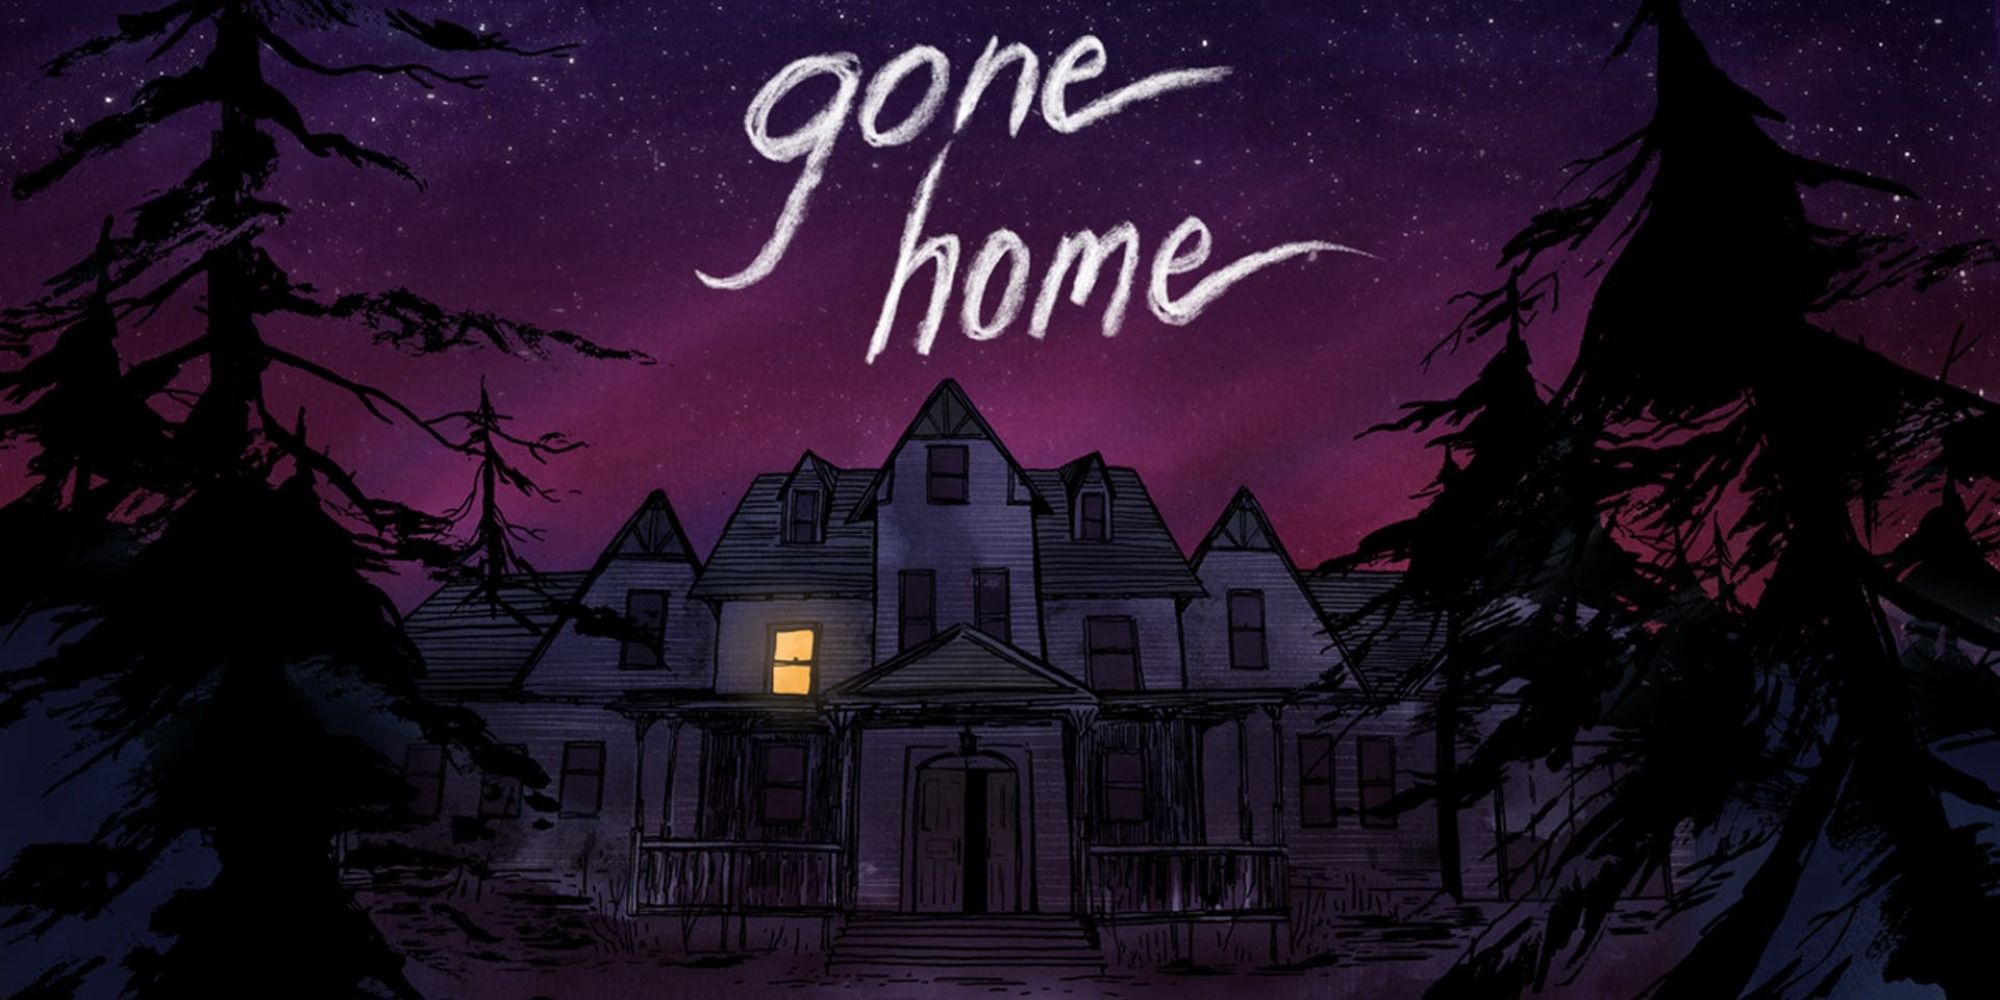 Gone Home purple night sky with house below, one window lit and title card middle top